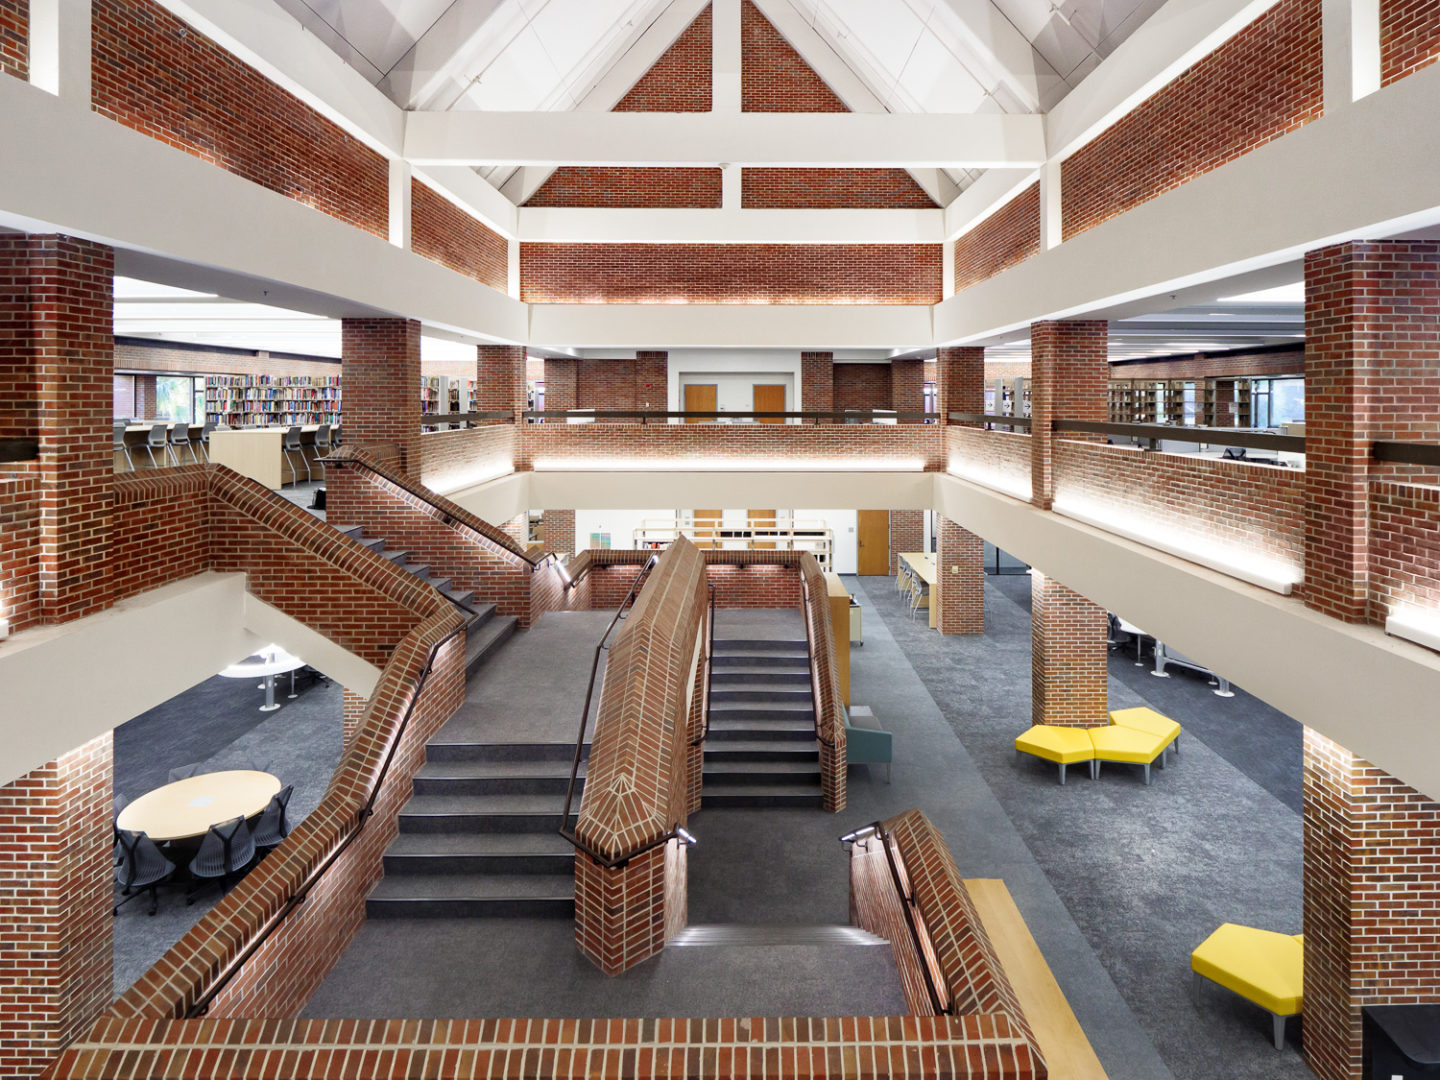 More than 35 years later, the UF Education Library gets a facelift